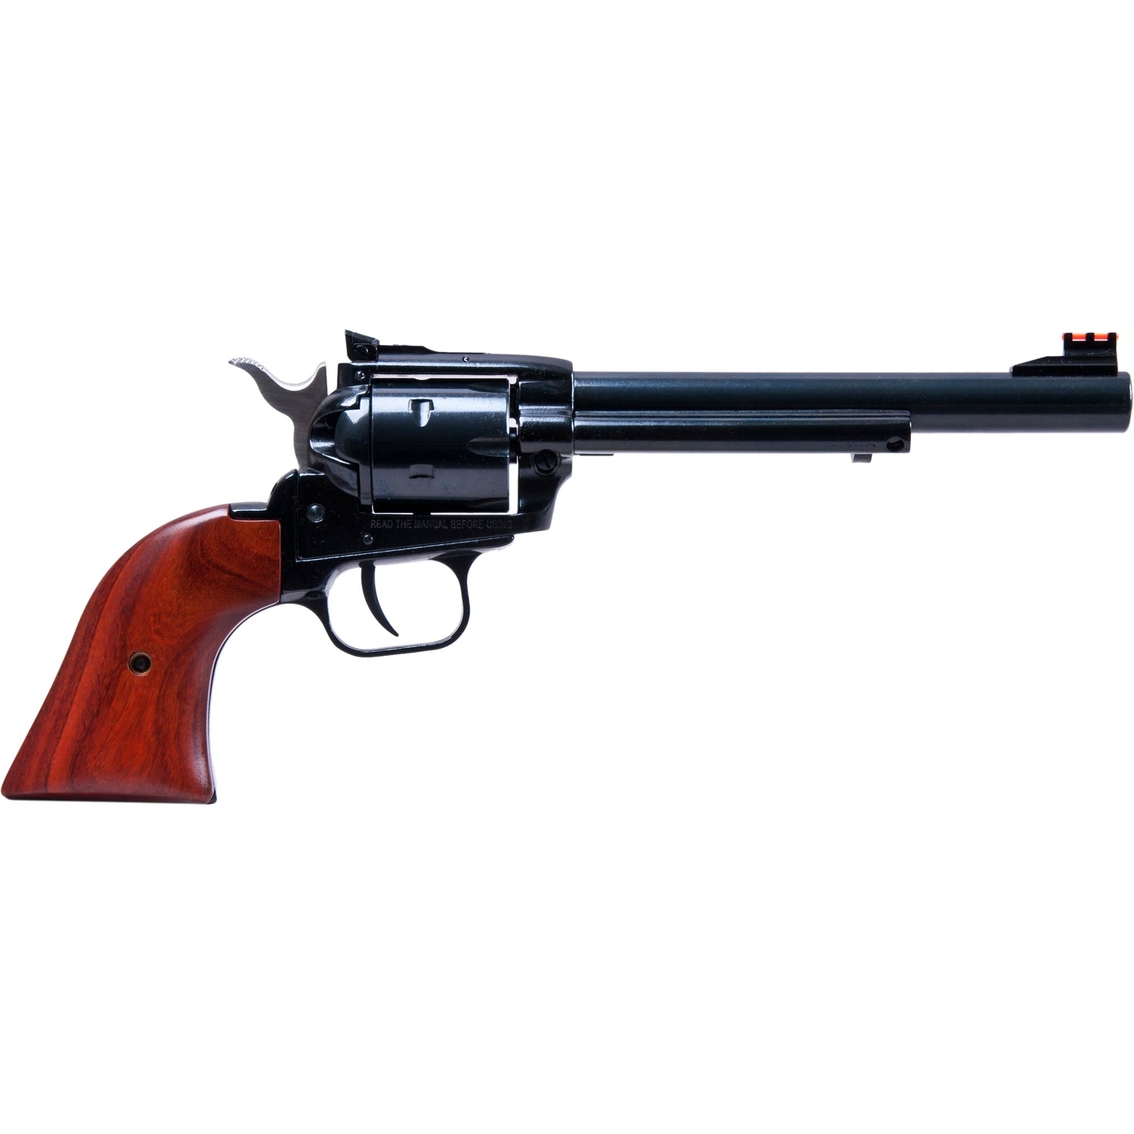 Heritage Rough Rider 22 LR 22 WMR 6.5 in. Barrel 6 Rds AS Revolver Blued - Image 2 of 2